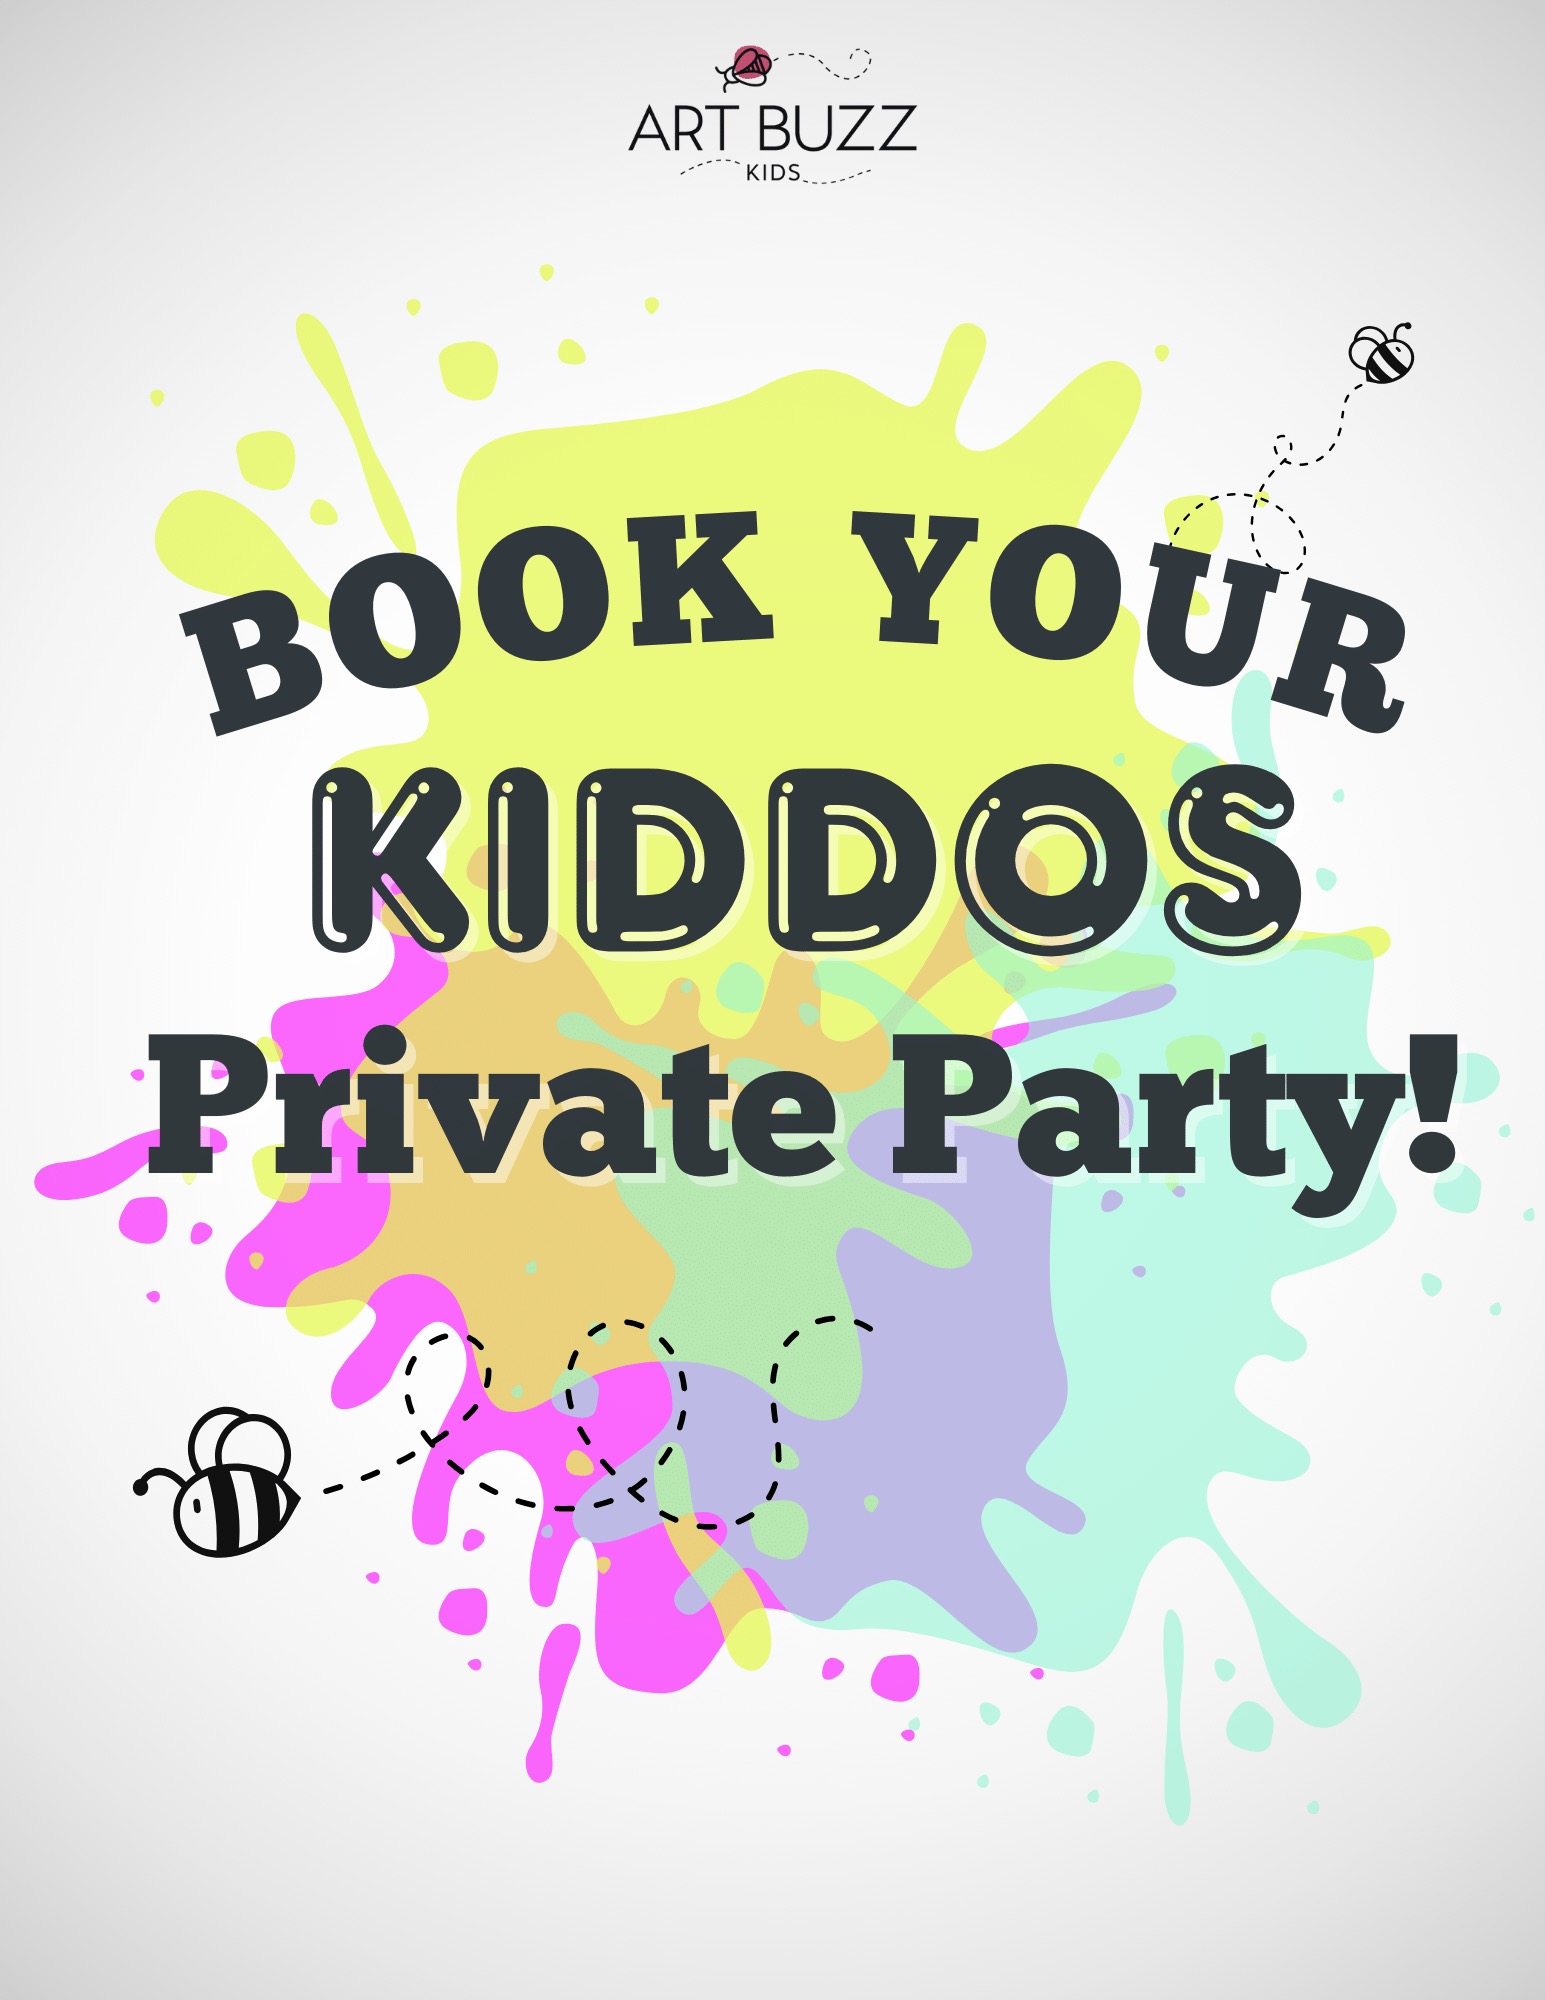 BOOK YOUR KIDDOS PRIVATE PAINT PARTY TODAY! (10 GUESTS MINIMUM)